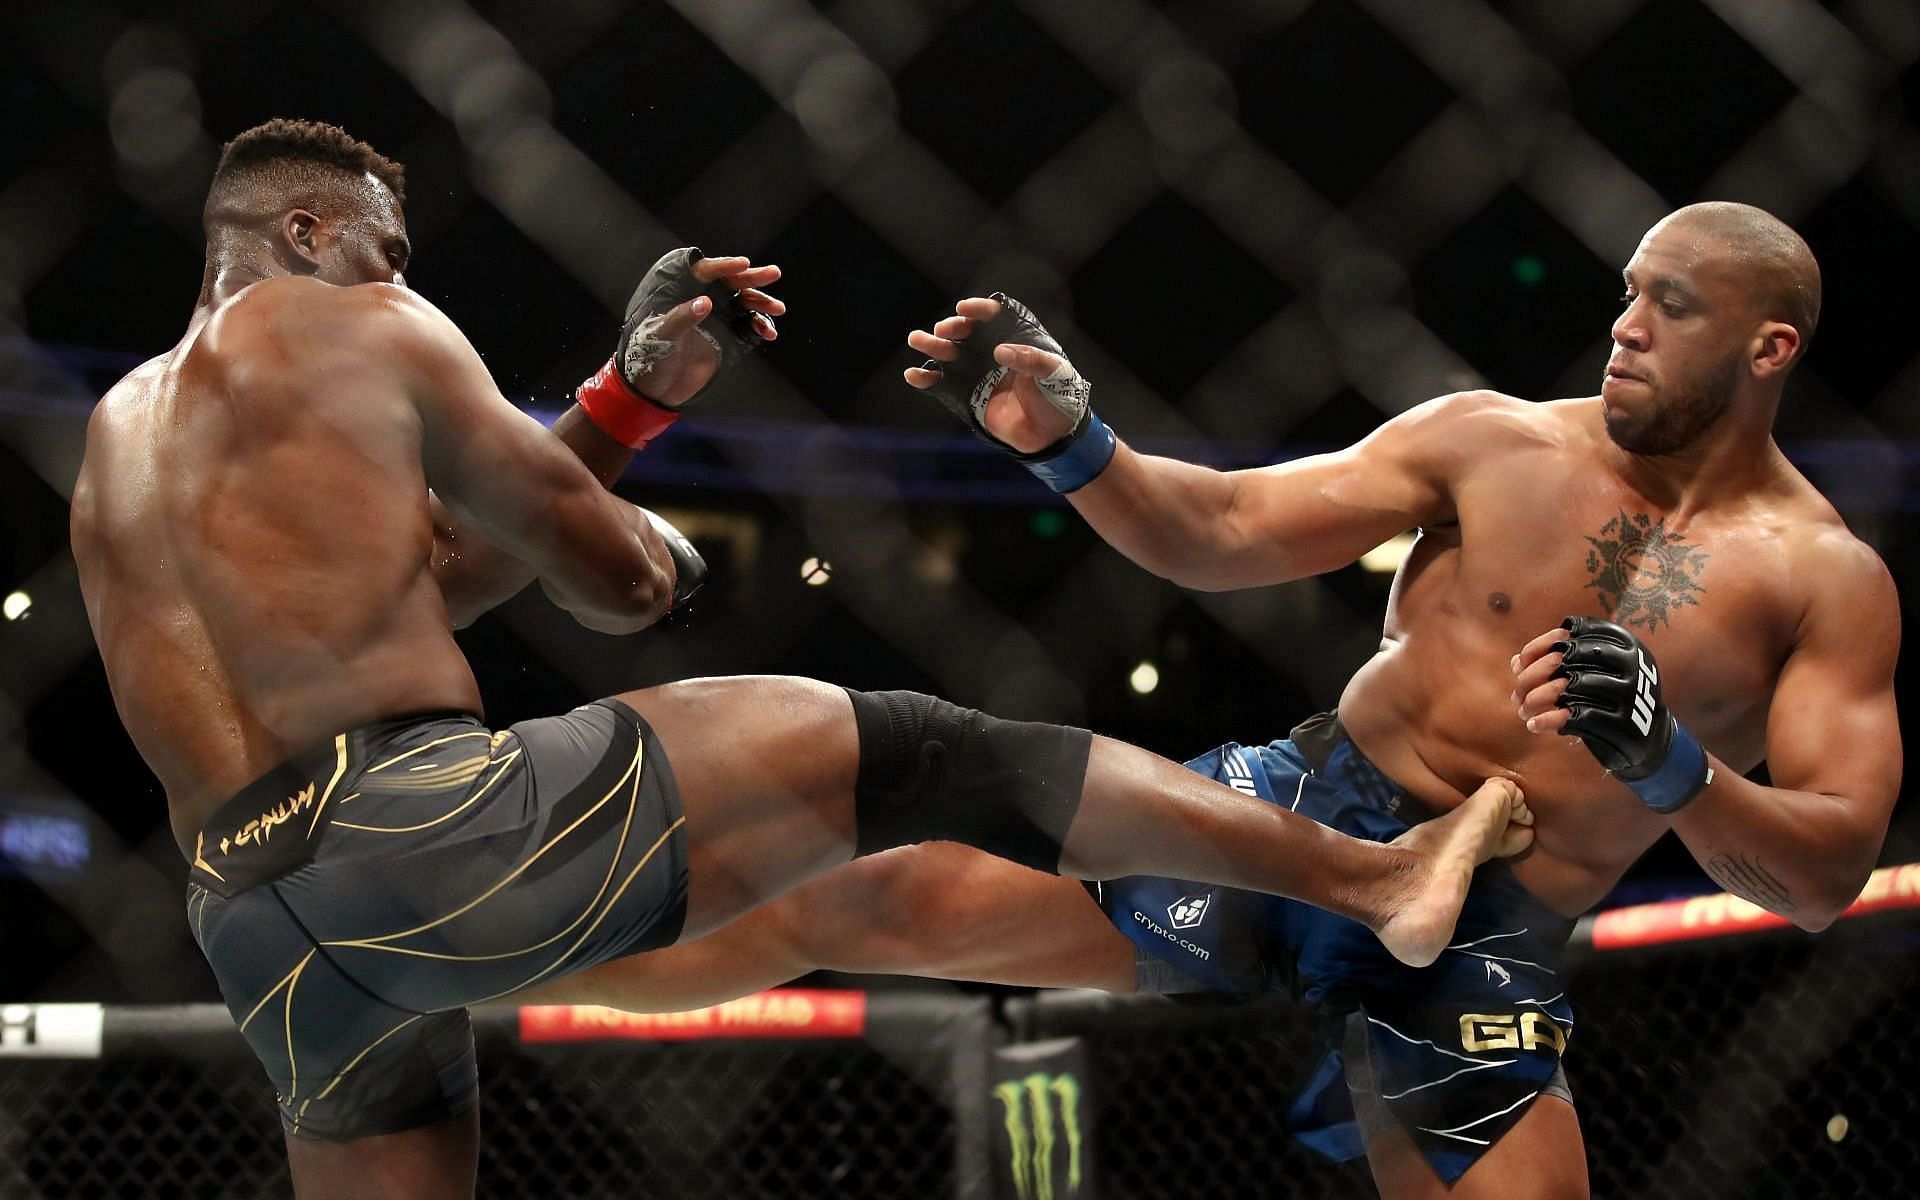 John McCarthy believes Francis Ngannou may well have lost to Ciryl Gane if the fight had remained on the feet